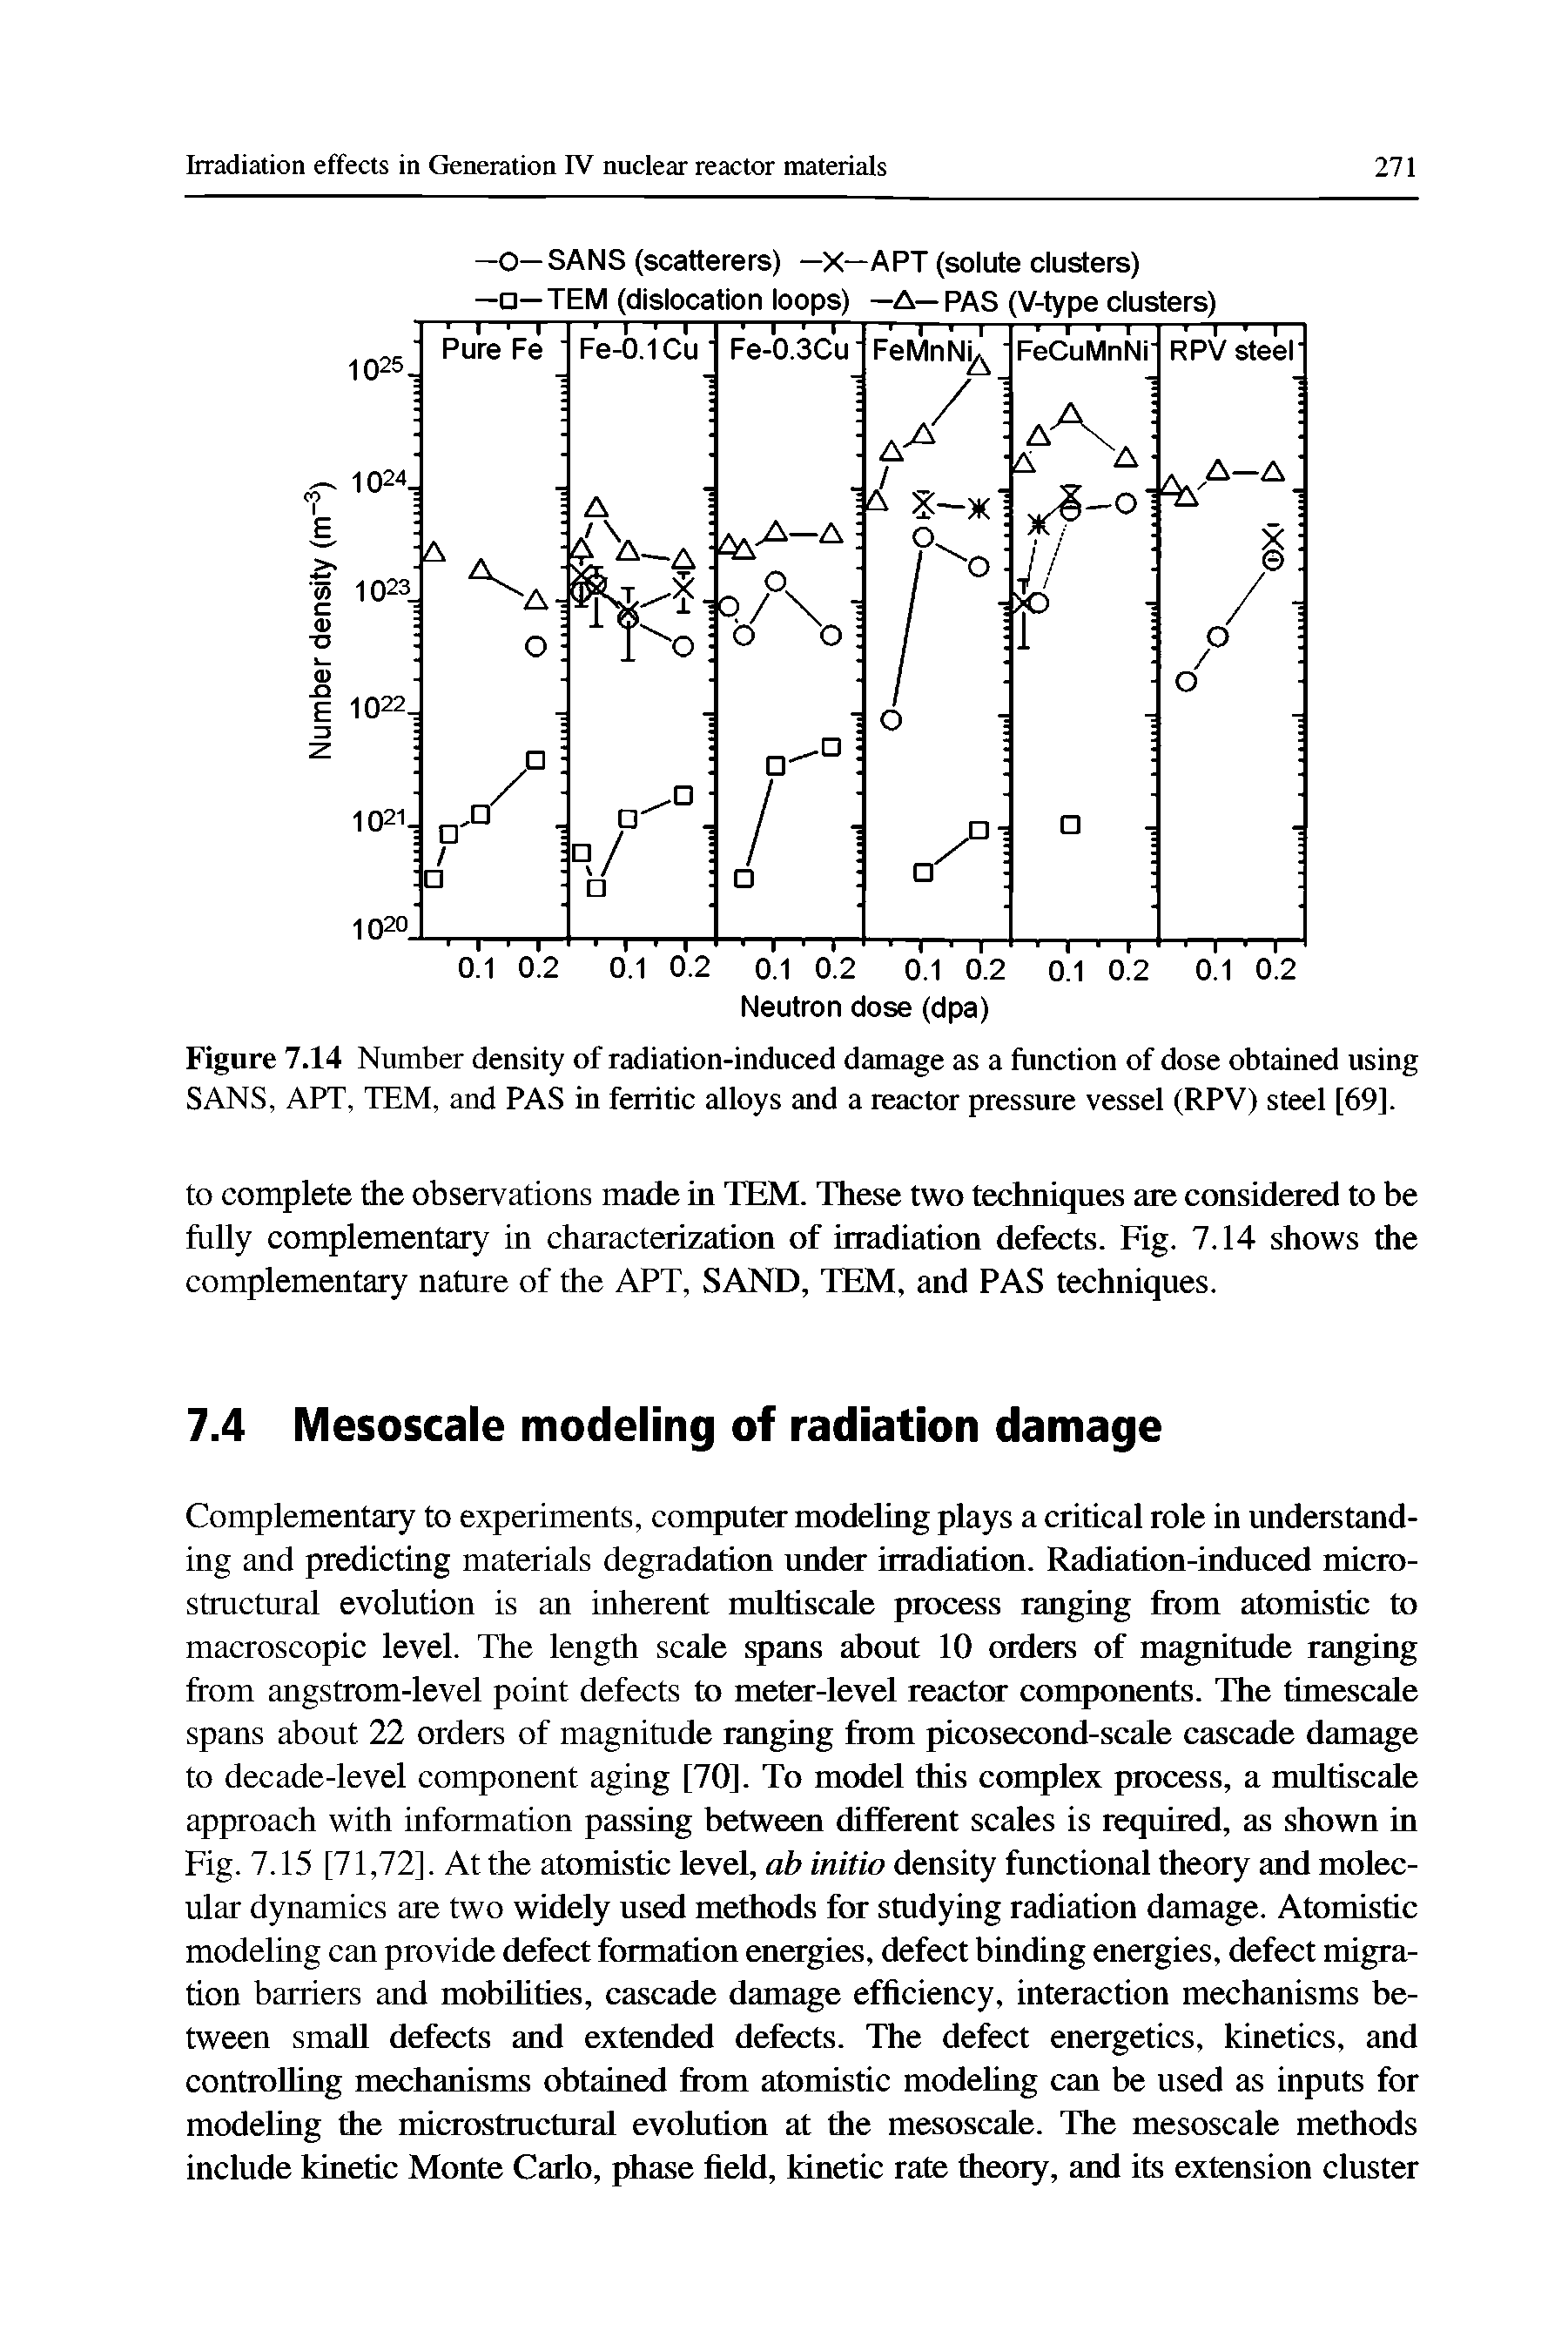 Figure 7.14 Number density of radiation-induced damage as a function of dose obtained using SANS, APT, TEM, and PAS in ferritic alloys and a reactor pressure vessel (RPV) steel [69].